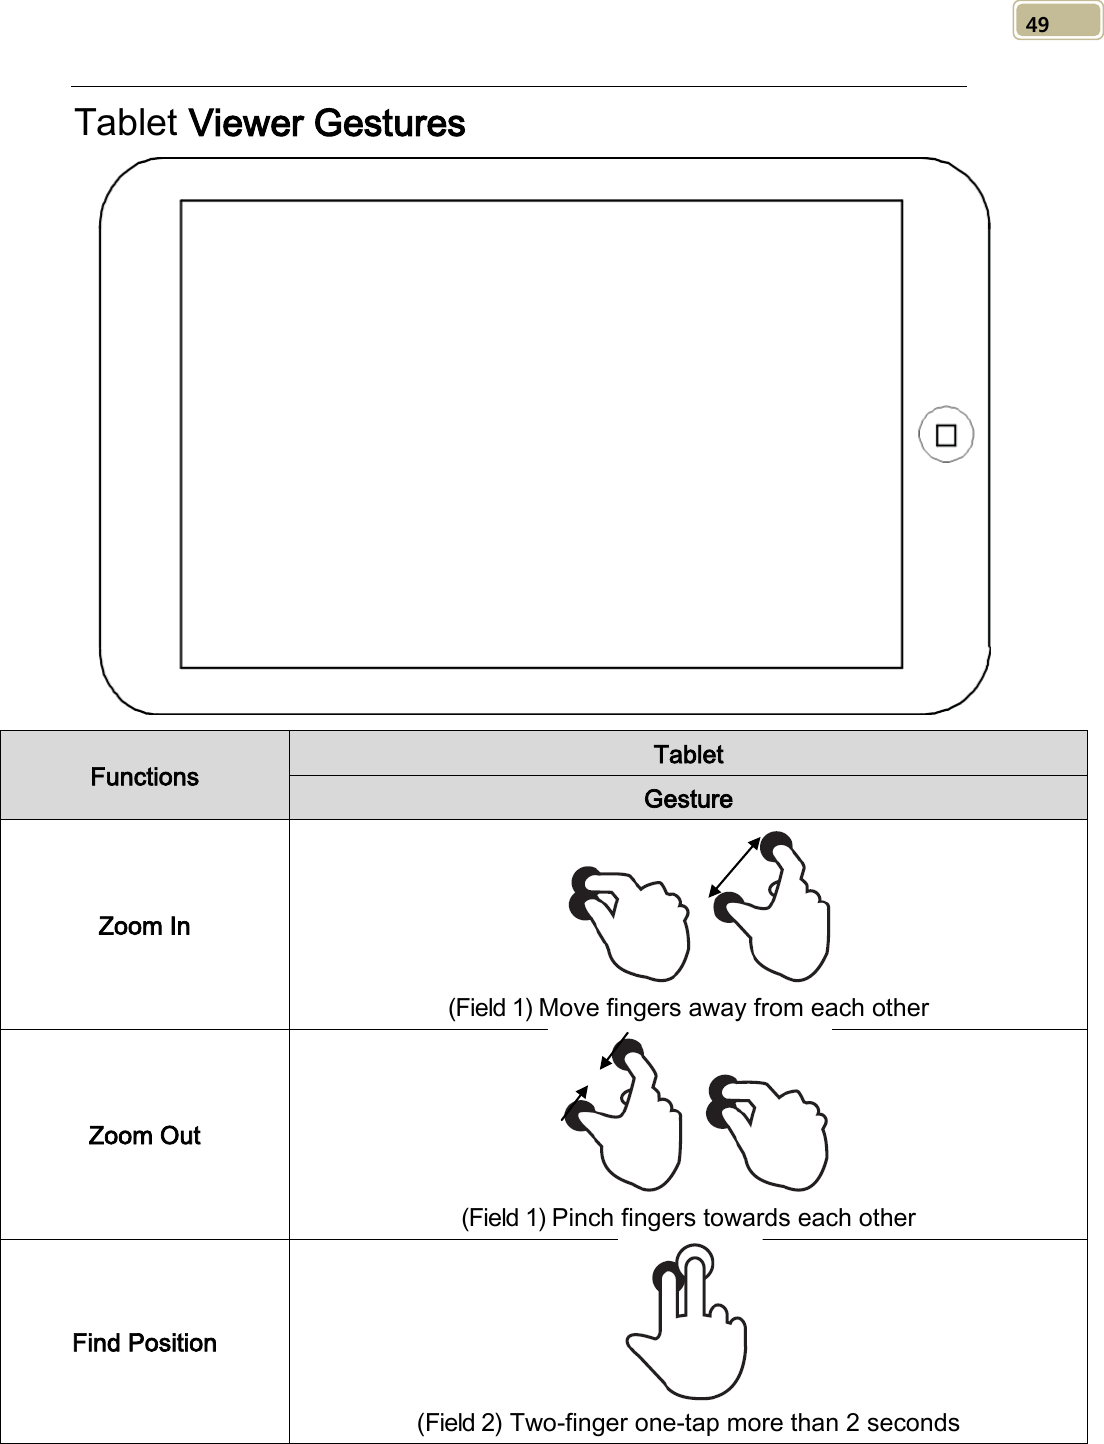   49 Tablet Viewer Gestures  Functions Tablet Gesture Zoom In    (Field 1) Move fingers away from each other Zoom Out  (Field 1) Pinch fingers towards each other Find Position  (Field 2) Two-finger one-tap more than 2 seconds 